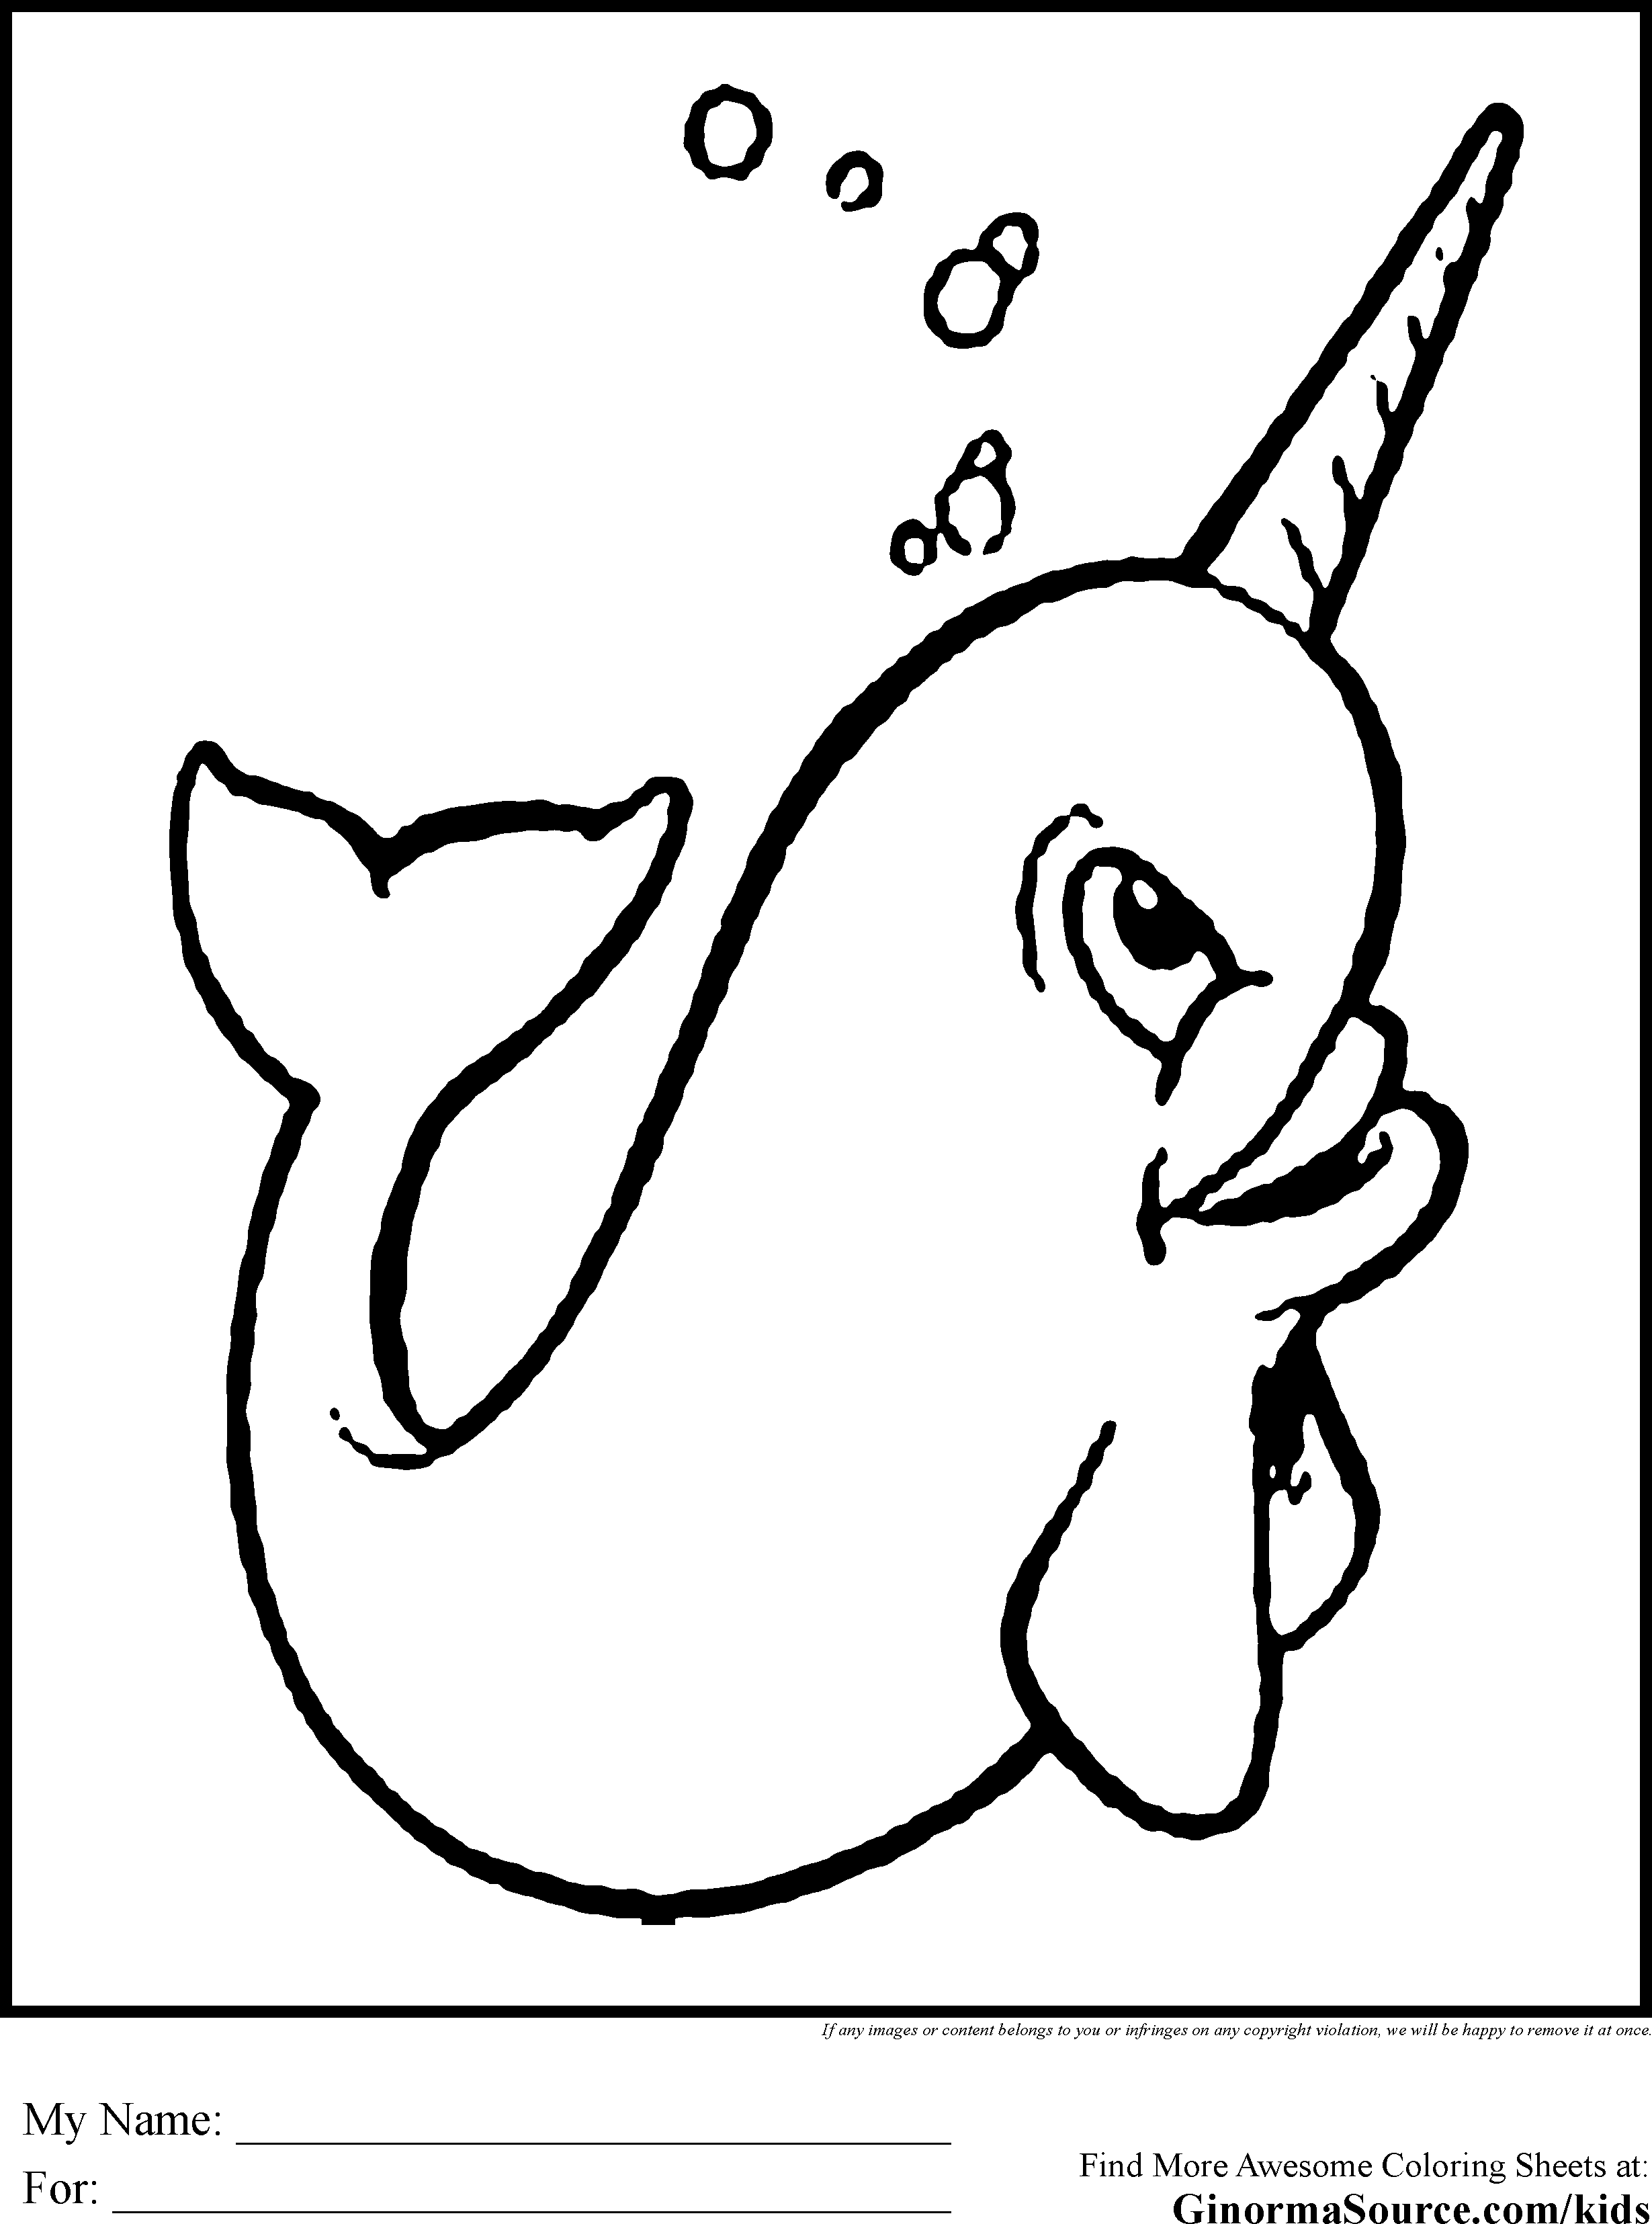 Narwhal Coloring Pages - GINORMAsource Kids | Unicorn coloring pages, Whale coloring  pages, Coloring pages